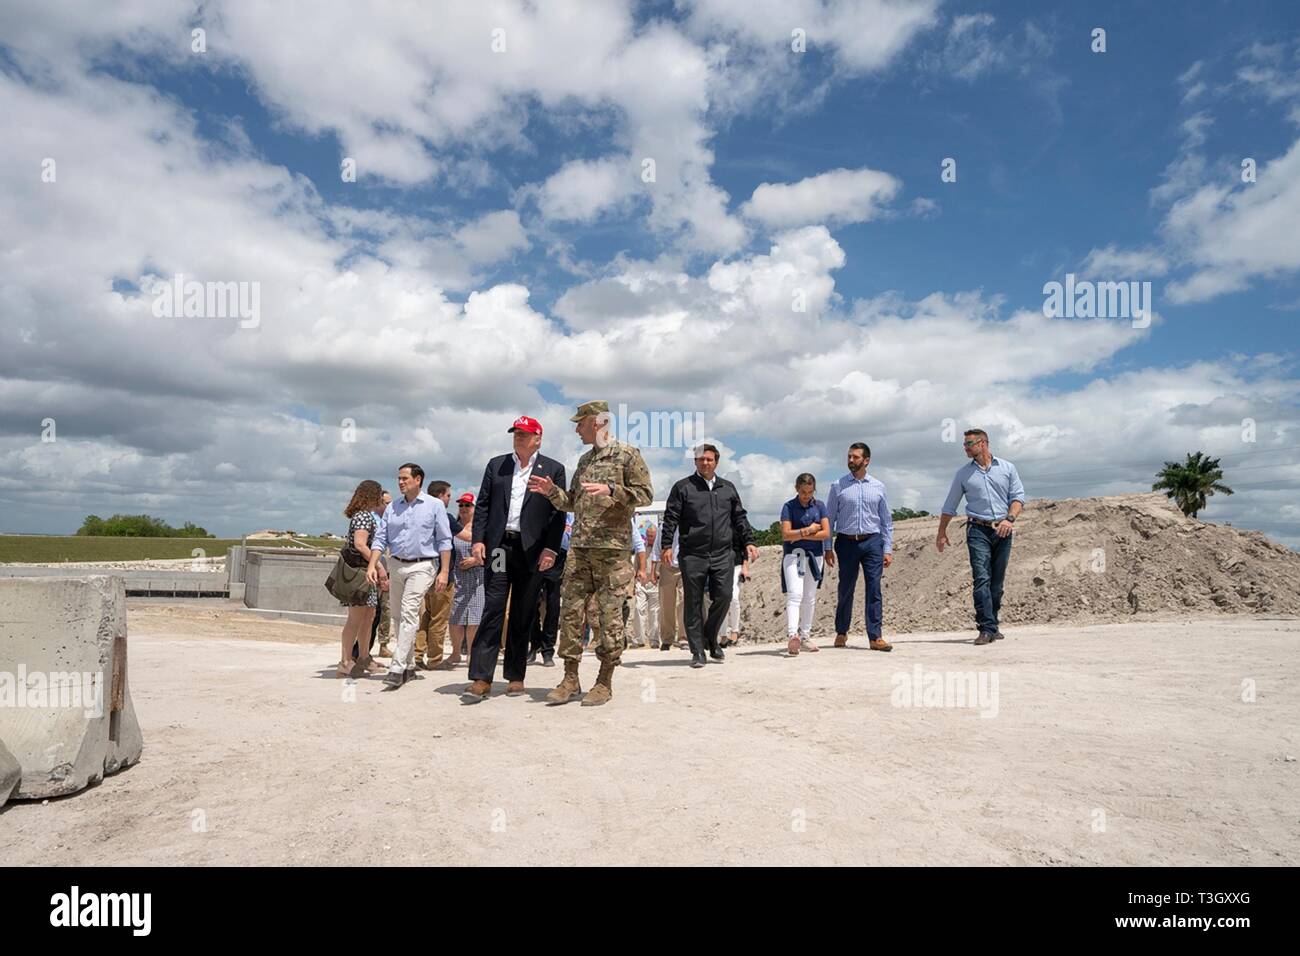 U.S President Donald Trump tours the Herbert Hoover Dike during a visit to Lake Okeechobee with Florida Gov. Ron DeSantis, Sen. Marco Rubio, and Sen. Rick Scott March 29, 2019 in Canal Point, Florida. The Herbert Hoover Dike is a 143-mile earthen dam that surrounds Lake Okeechobee and currently under a massive renovation and repair project. Stock Photo